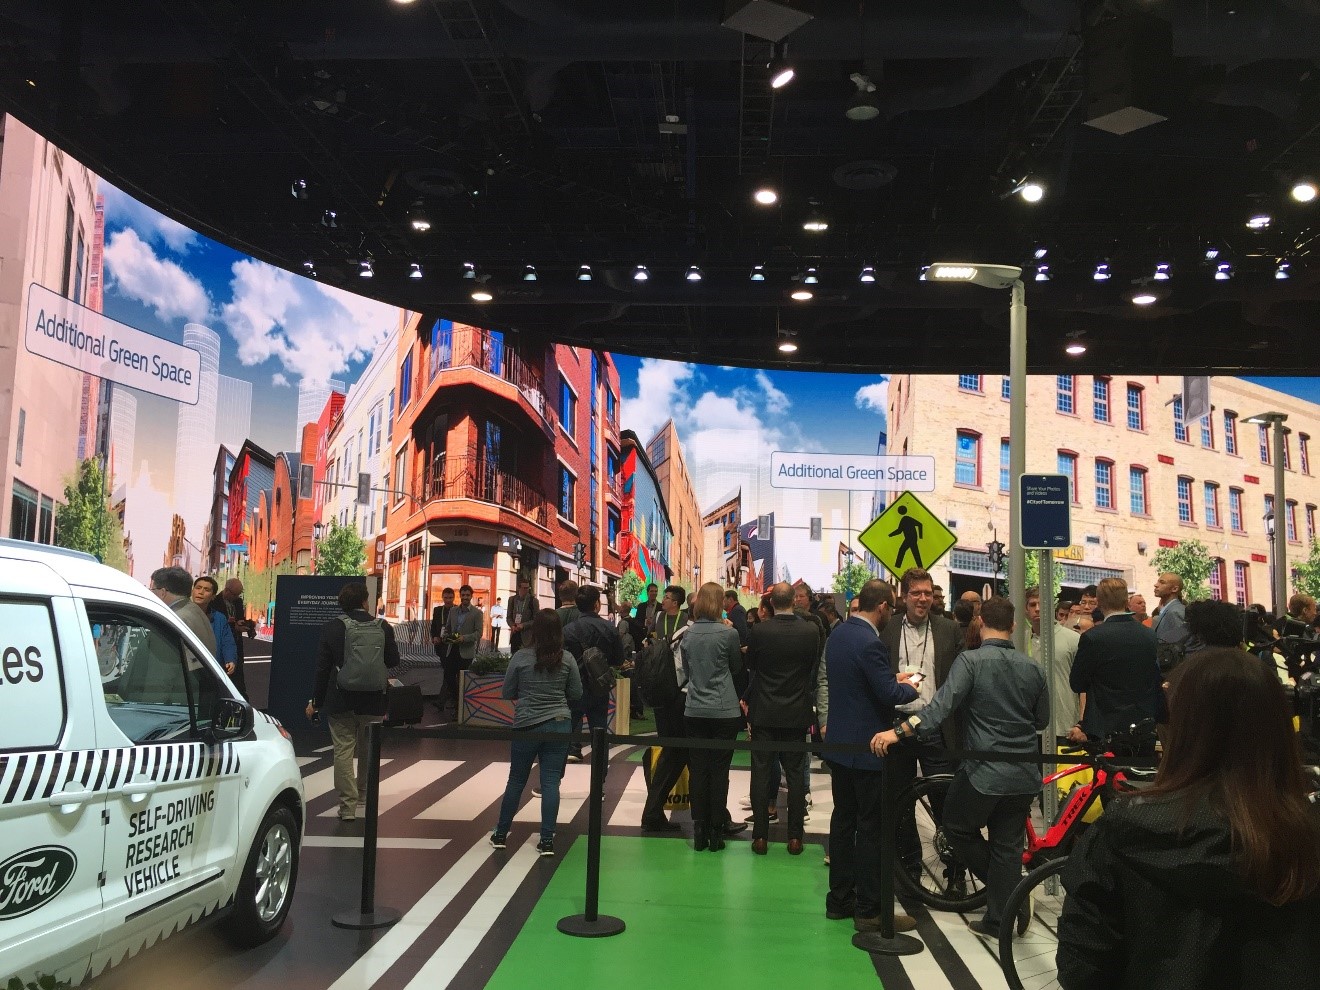 Ford built a small indoor street to showcase its vision of integrated mobility including cars, bikes, pedestrians and Ford self-driving vehicles. Integrated mobility was also the topic of Ford CEO Jim Hackett’s keynote address. Hackett talked about shared transportation and smart cities to help with the development of autonomous driving and connectivity. 